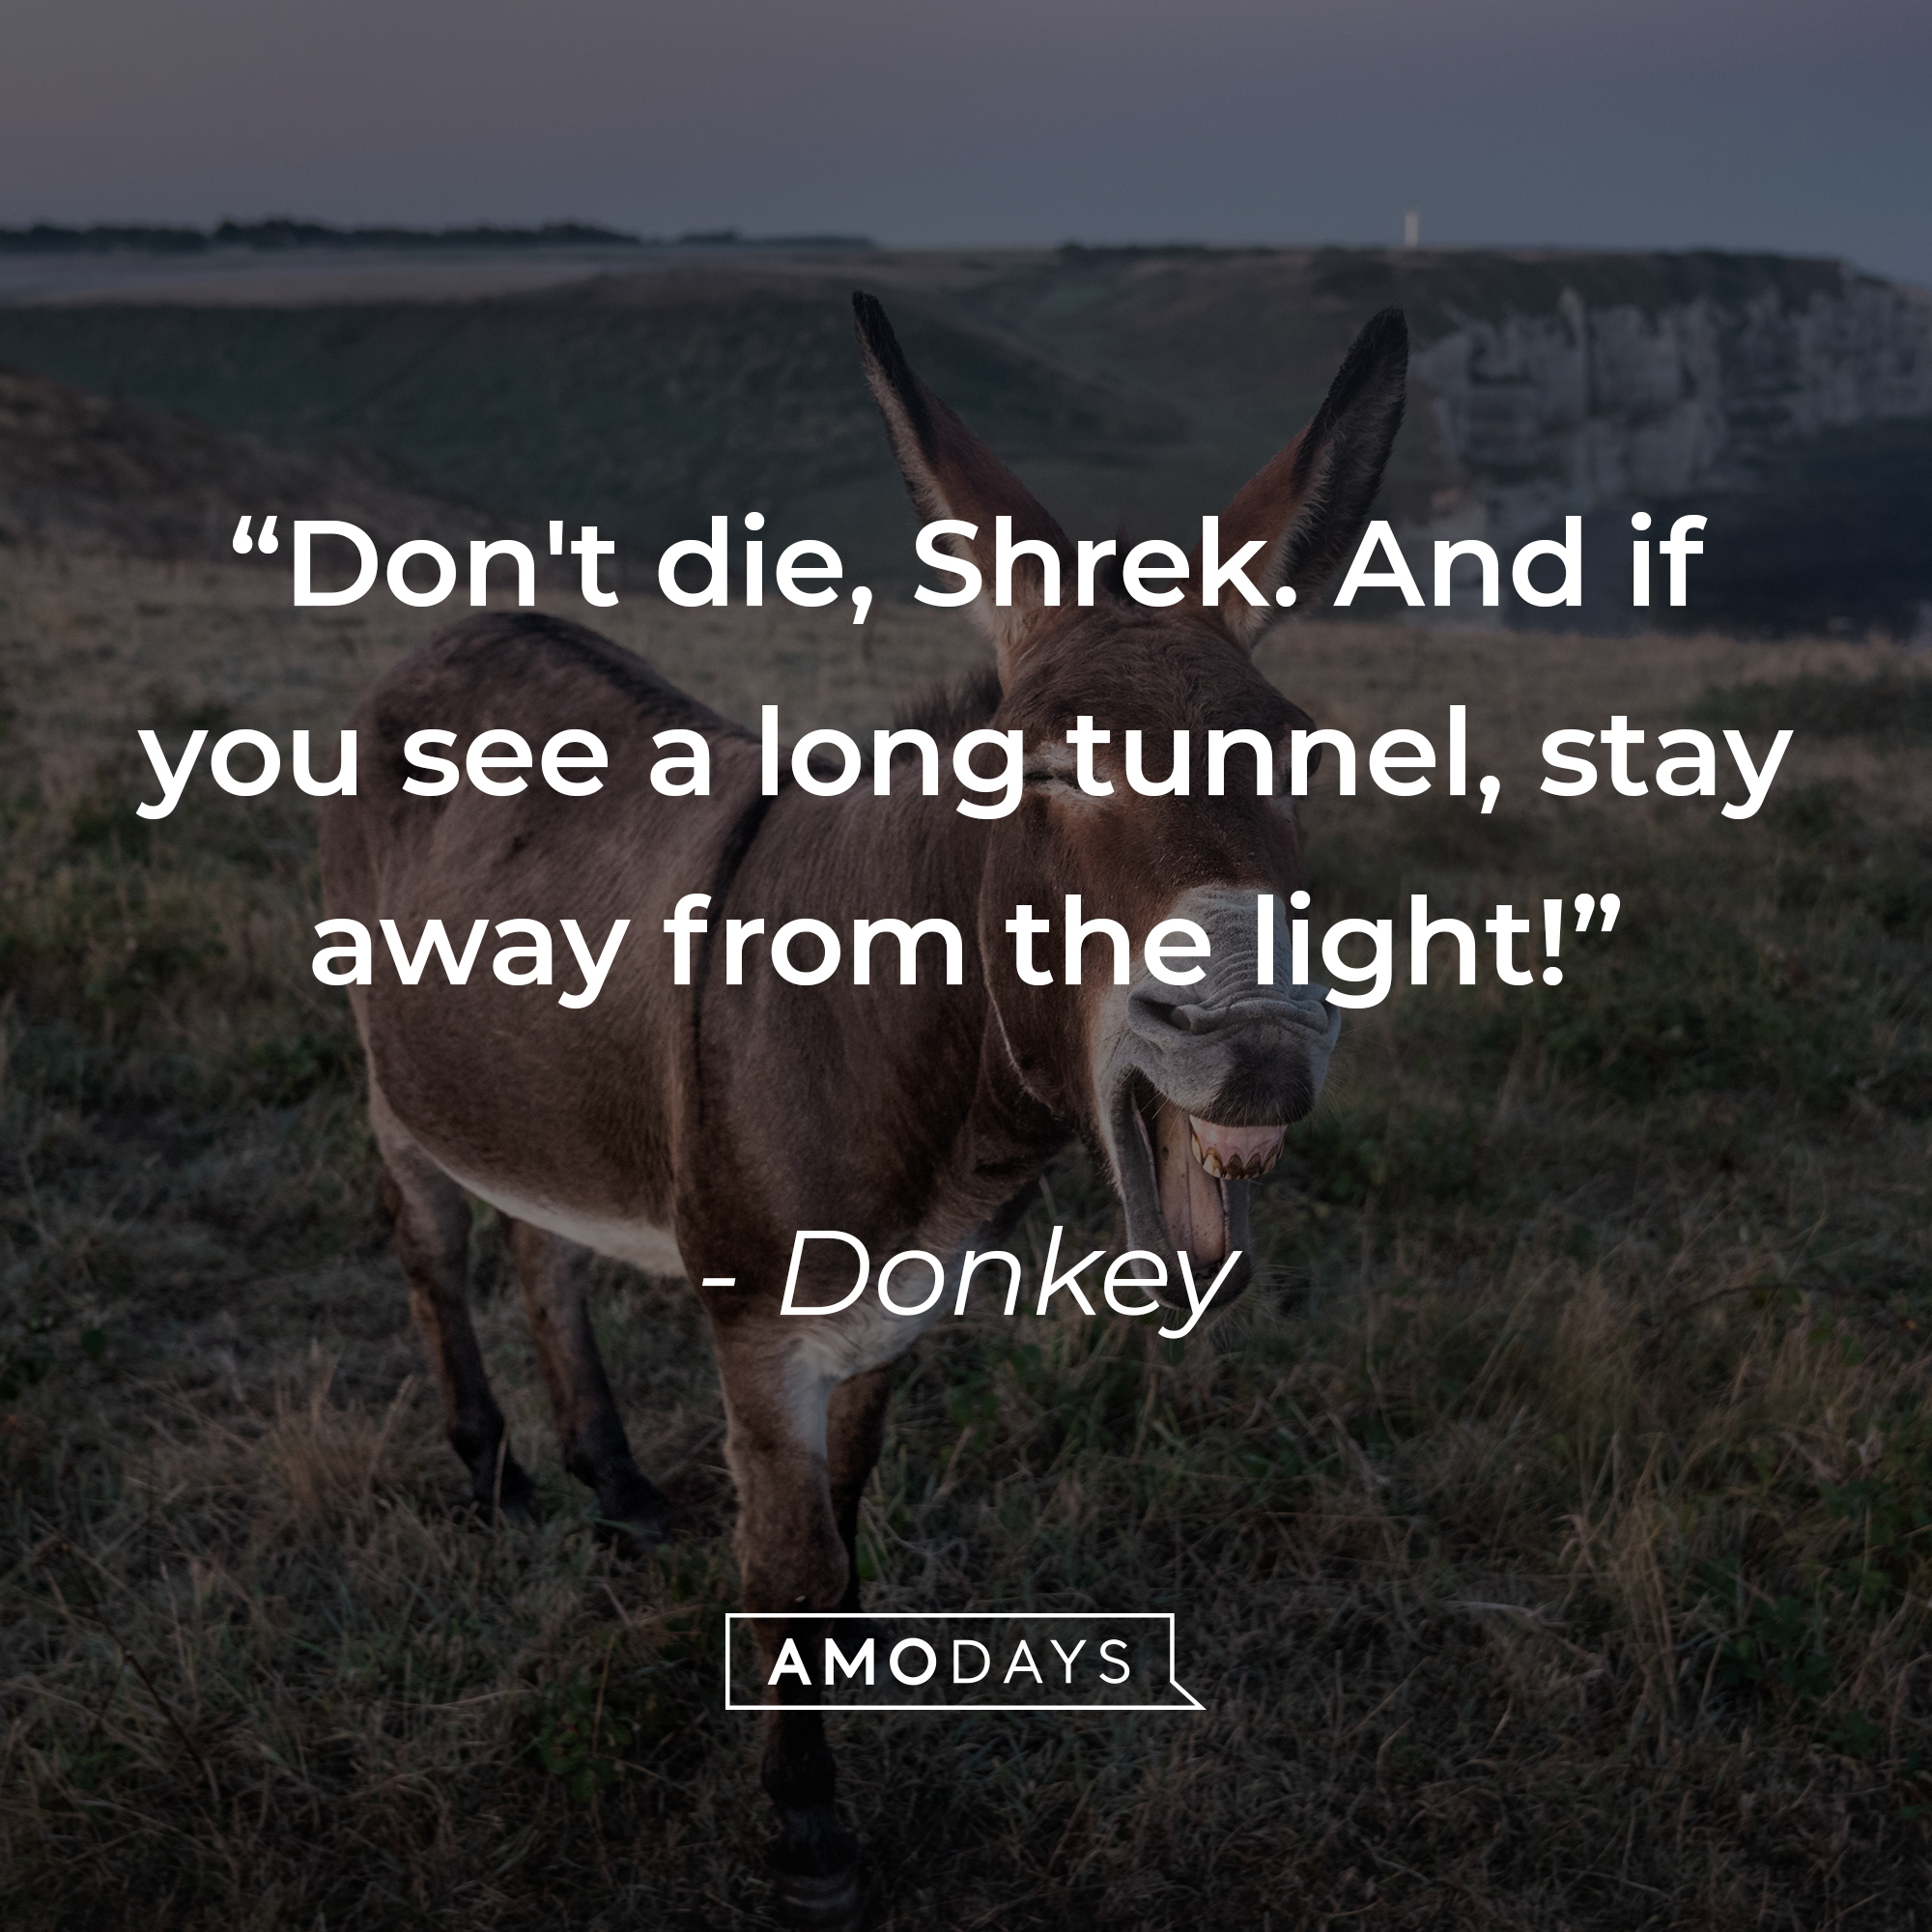 Donkey's quote: "Don't die, Shrek. And if you see a long tunnel, stay away from the light!" | Source: Unsplash